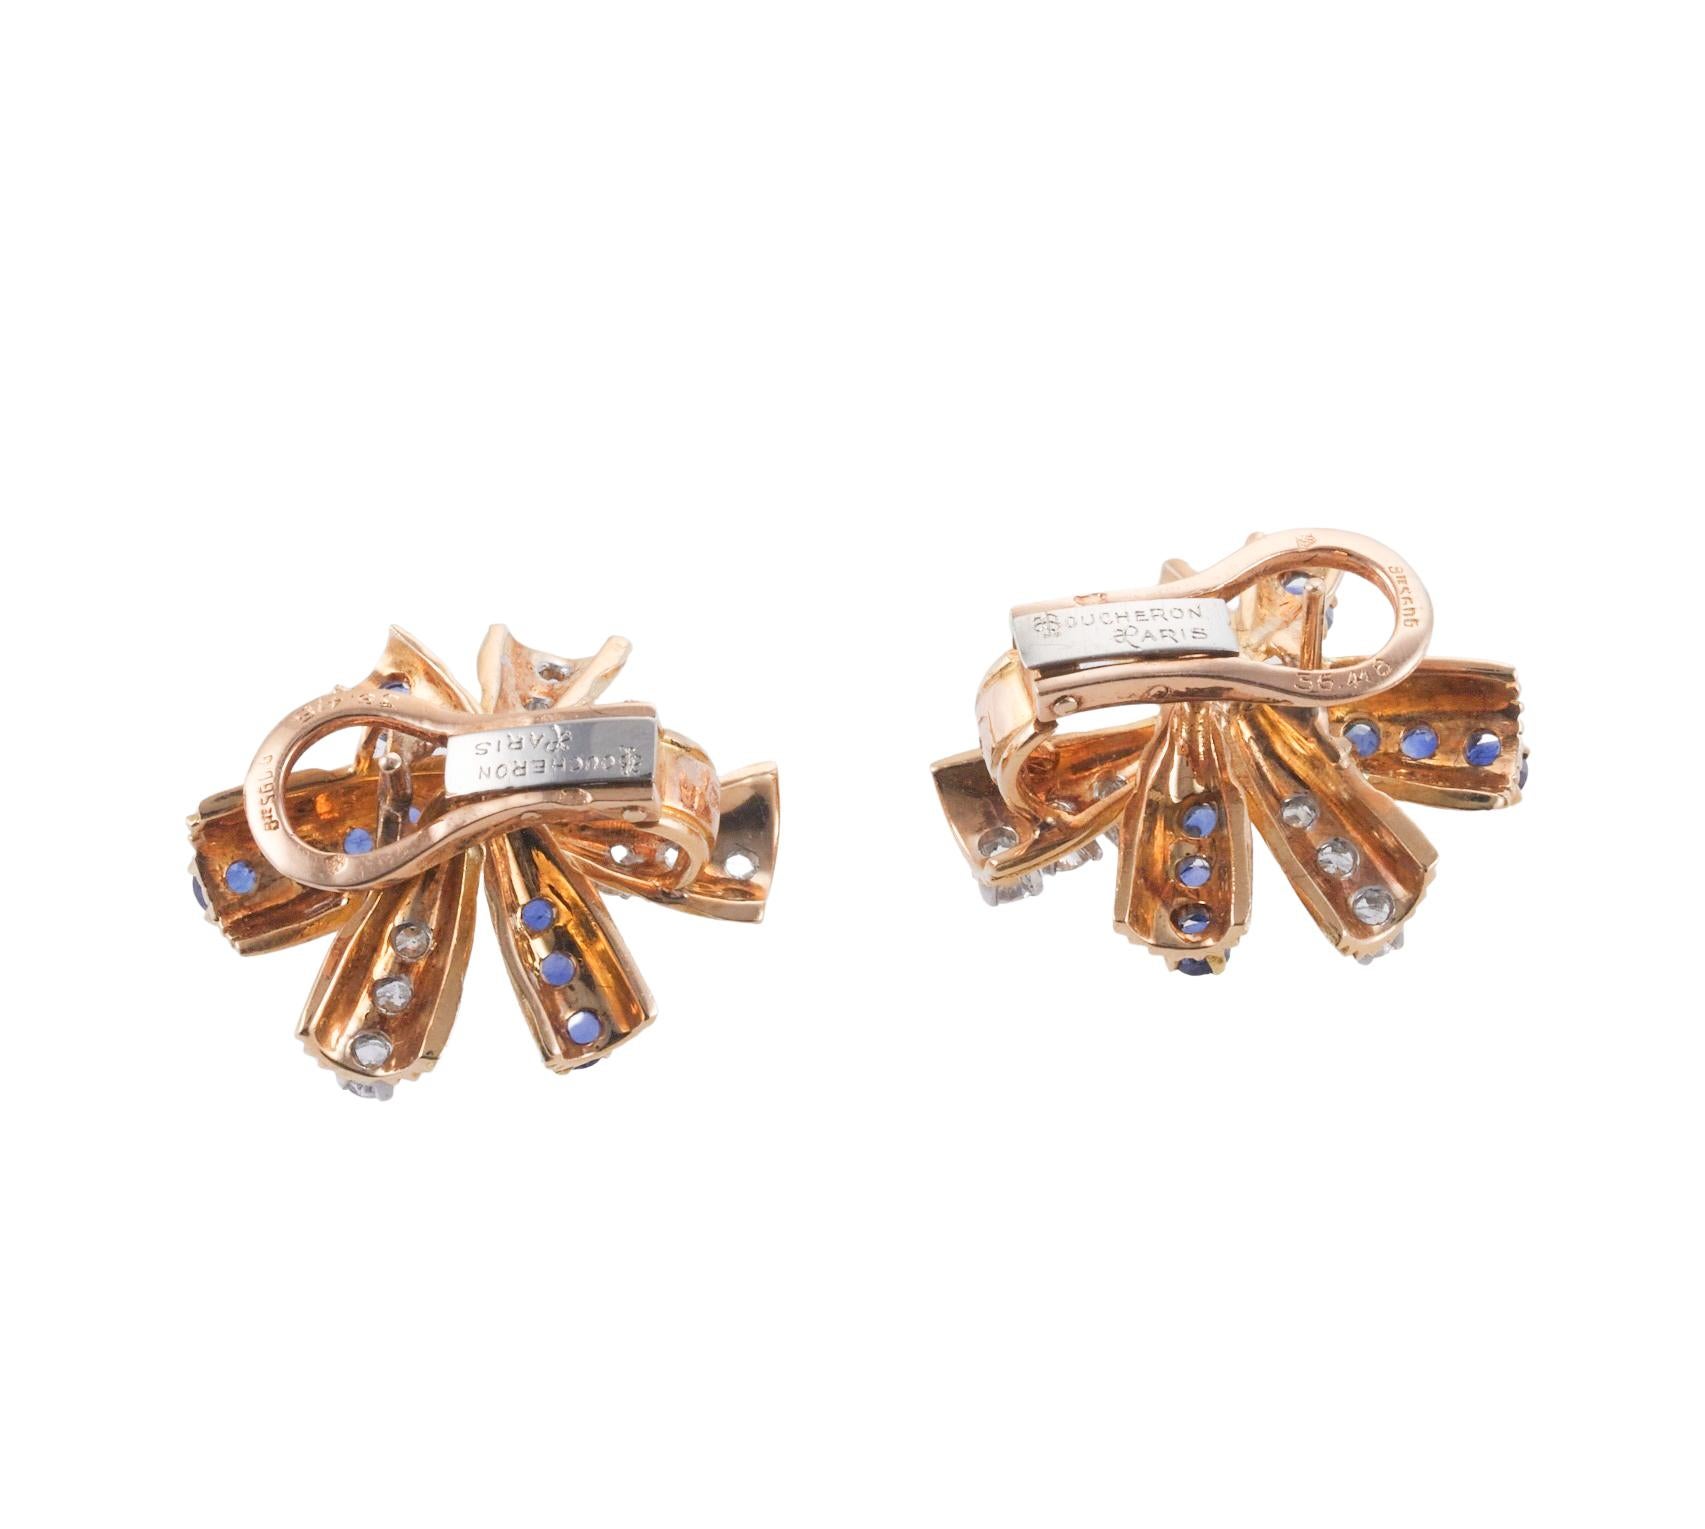 Boucheron Paris 1960s Diamond Sapphire Gold Earrings In Excellent Condition For Sale In New York, NY